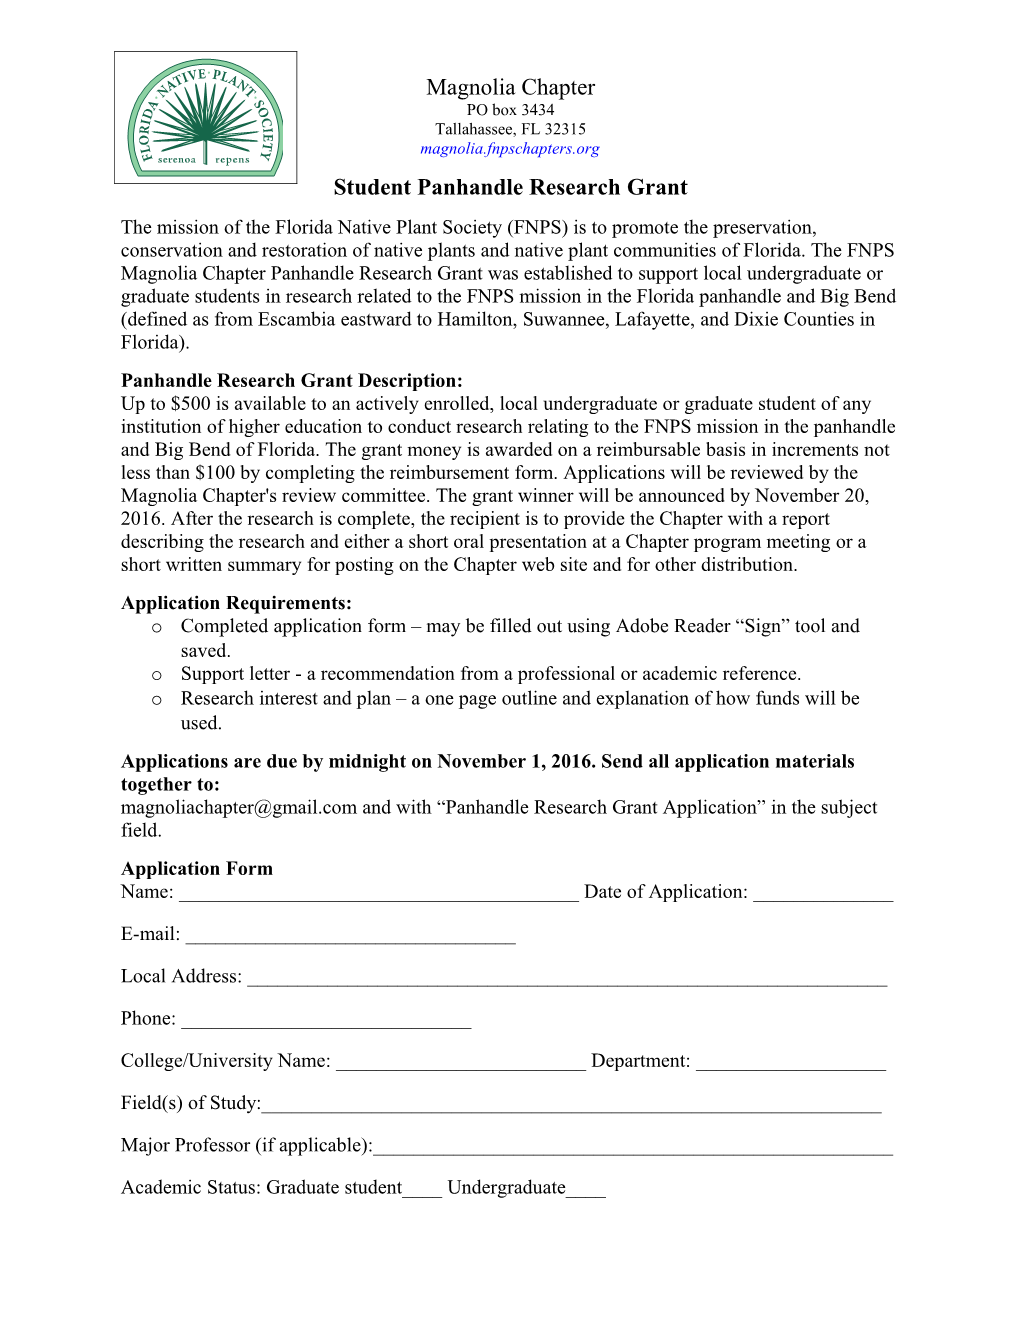 Student Panhandle Research Grant